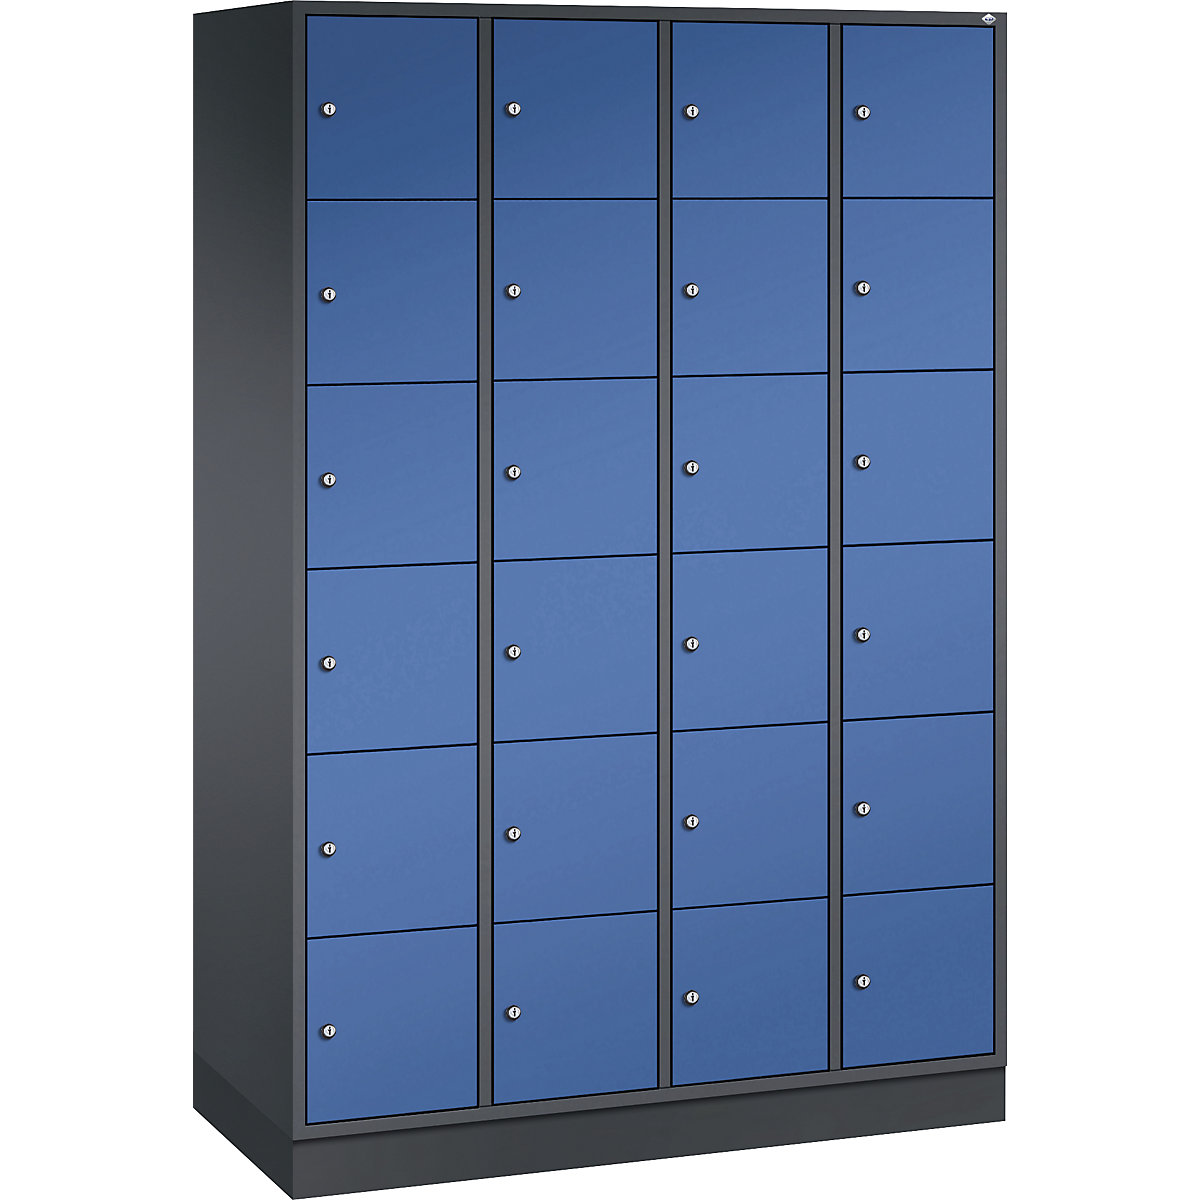 INTRO steel compartment locker, compartment height 285 mm – C+P, WxD 1220 x 500 mm, 24 compartments, black grey body, gentian blue doors-9